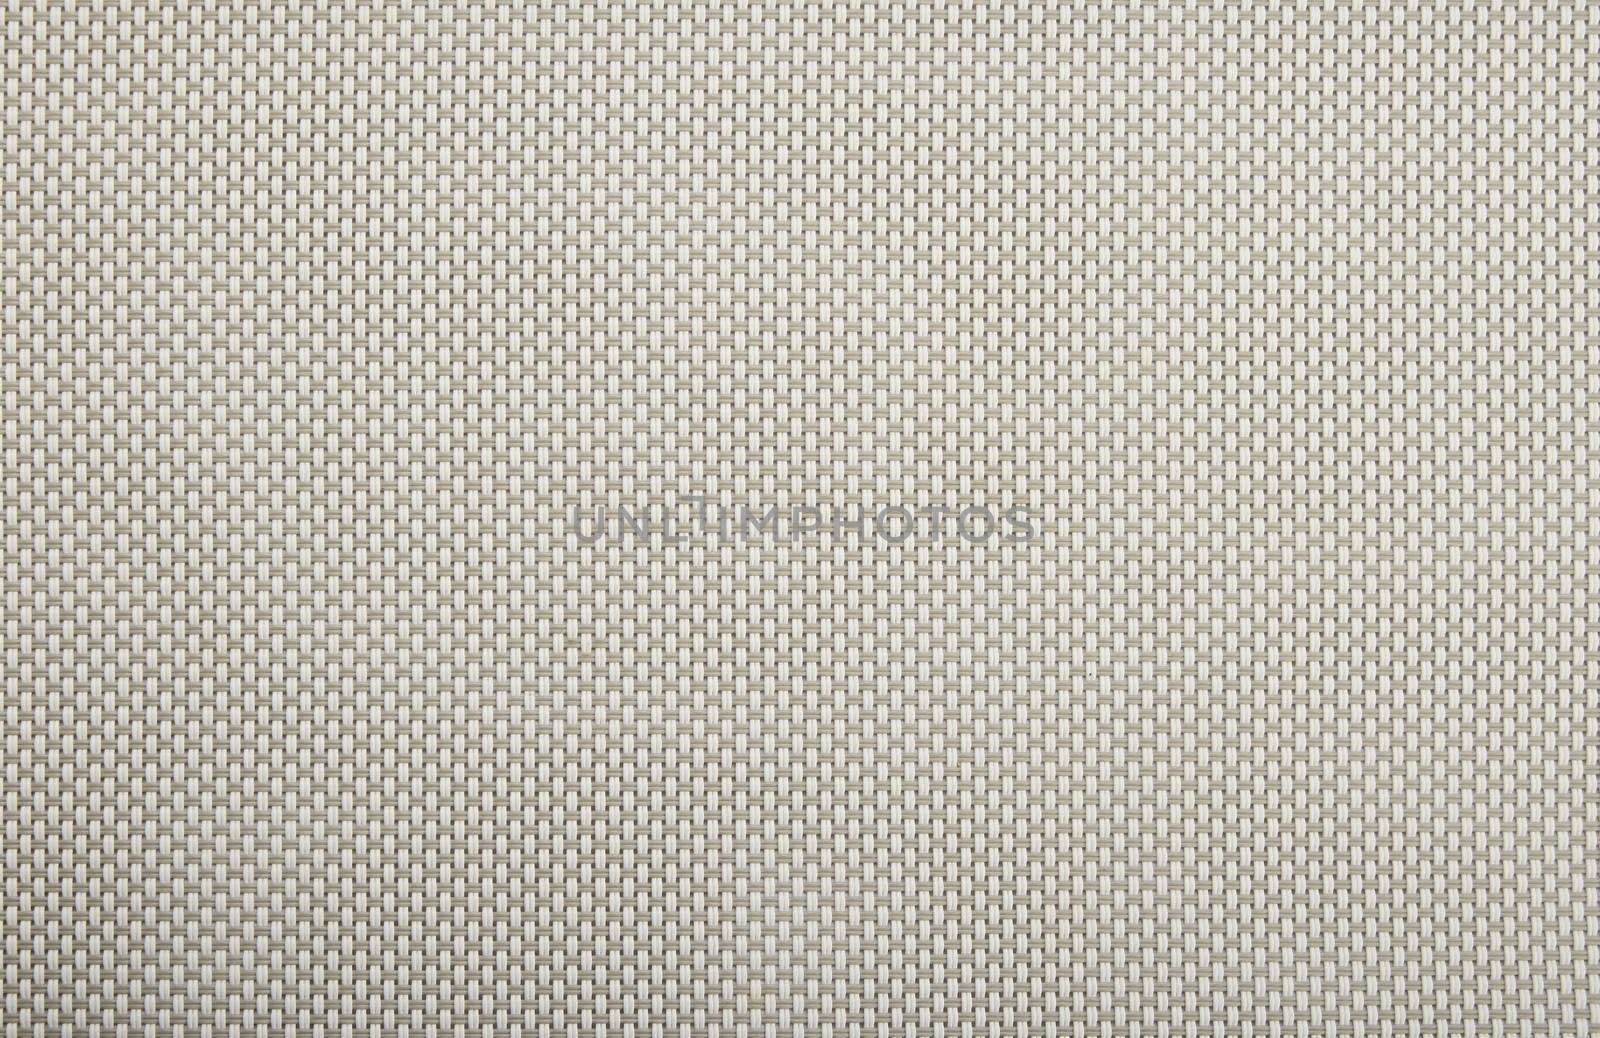 Background texture of horizontal gray and vertical white wicker braided plastic double strings with small mesh